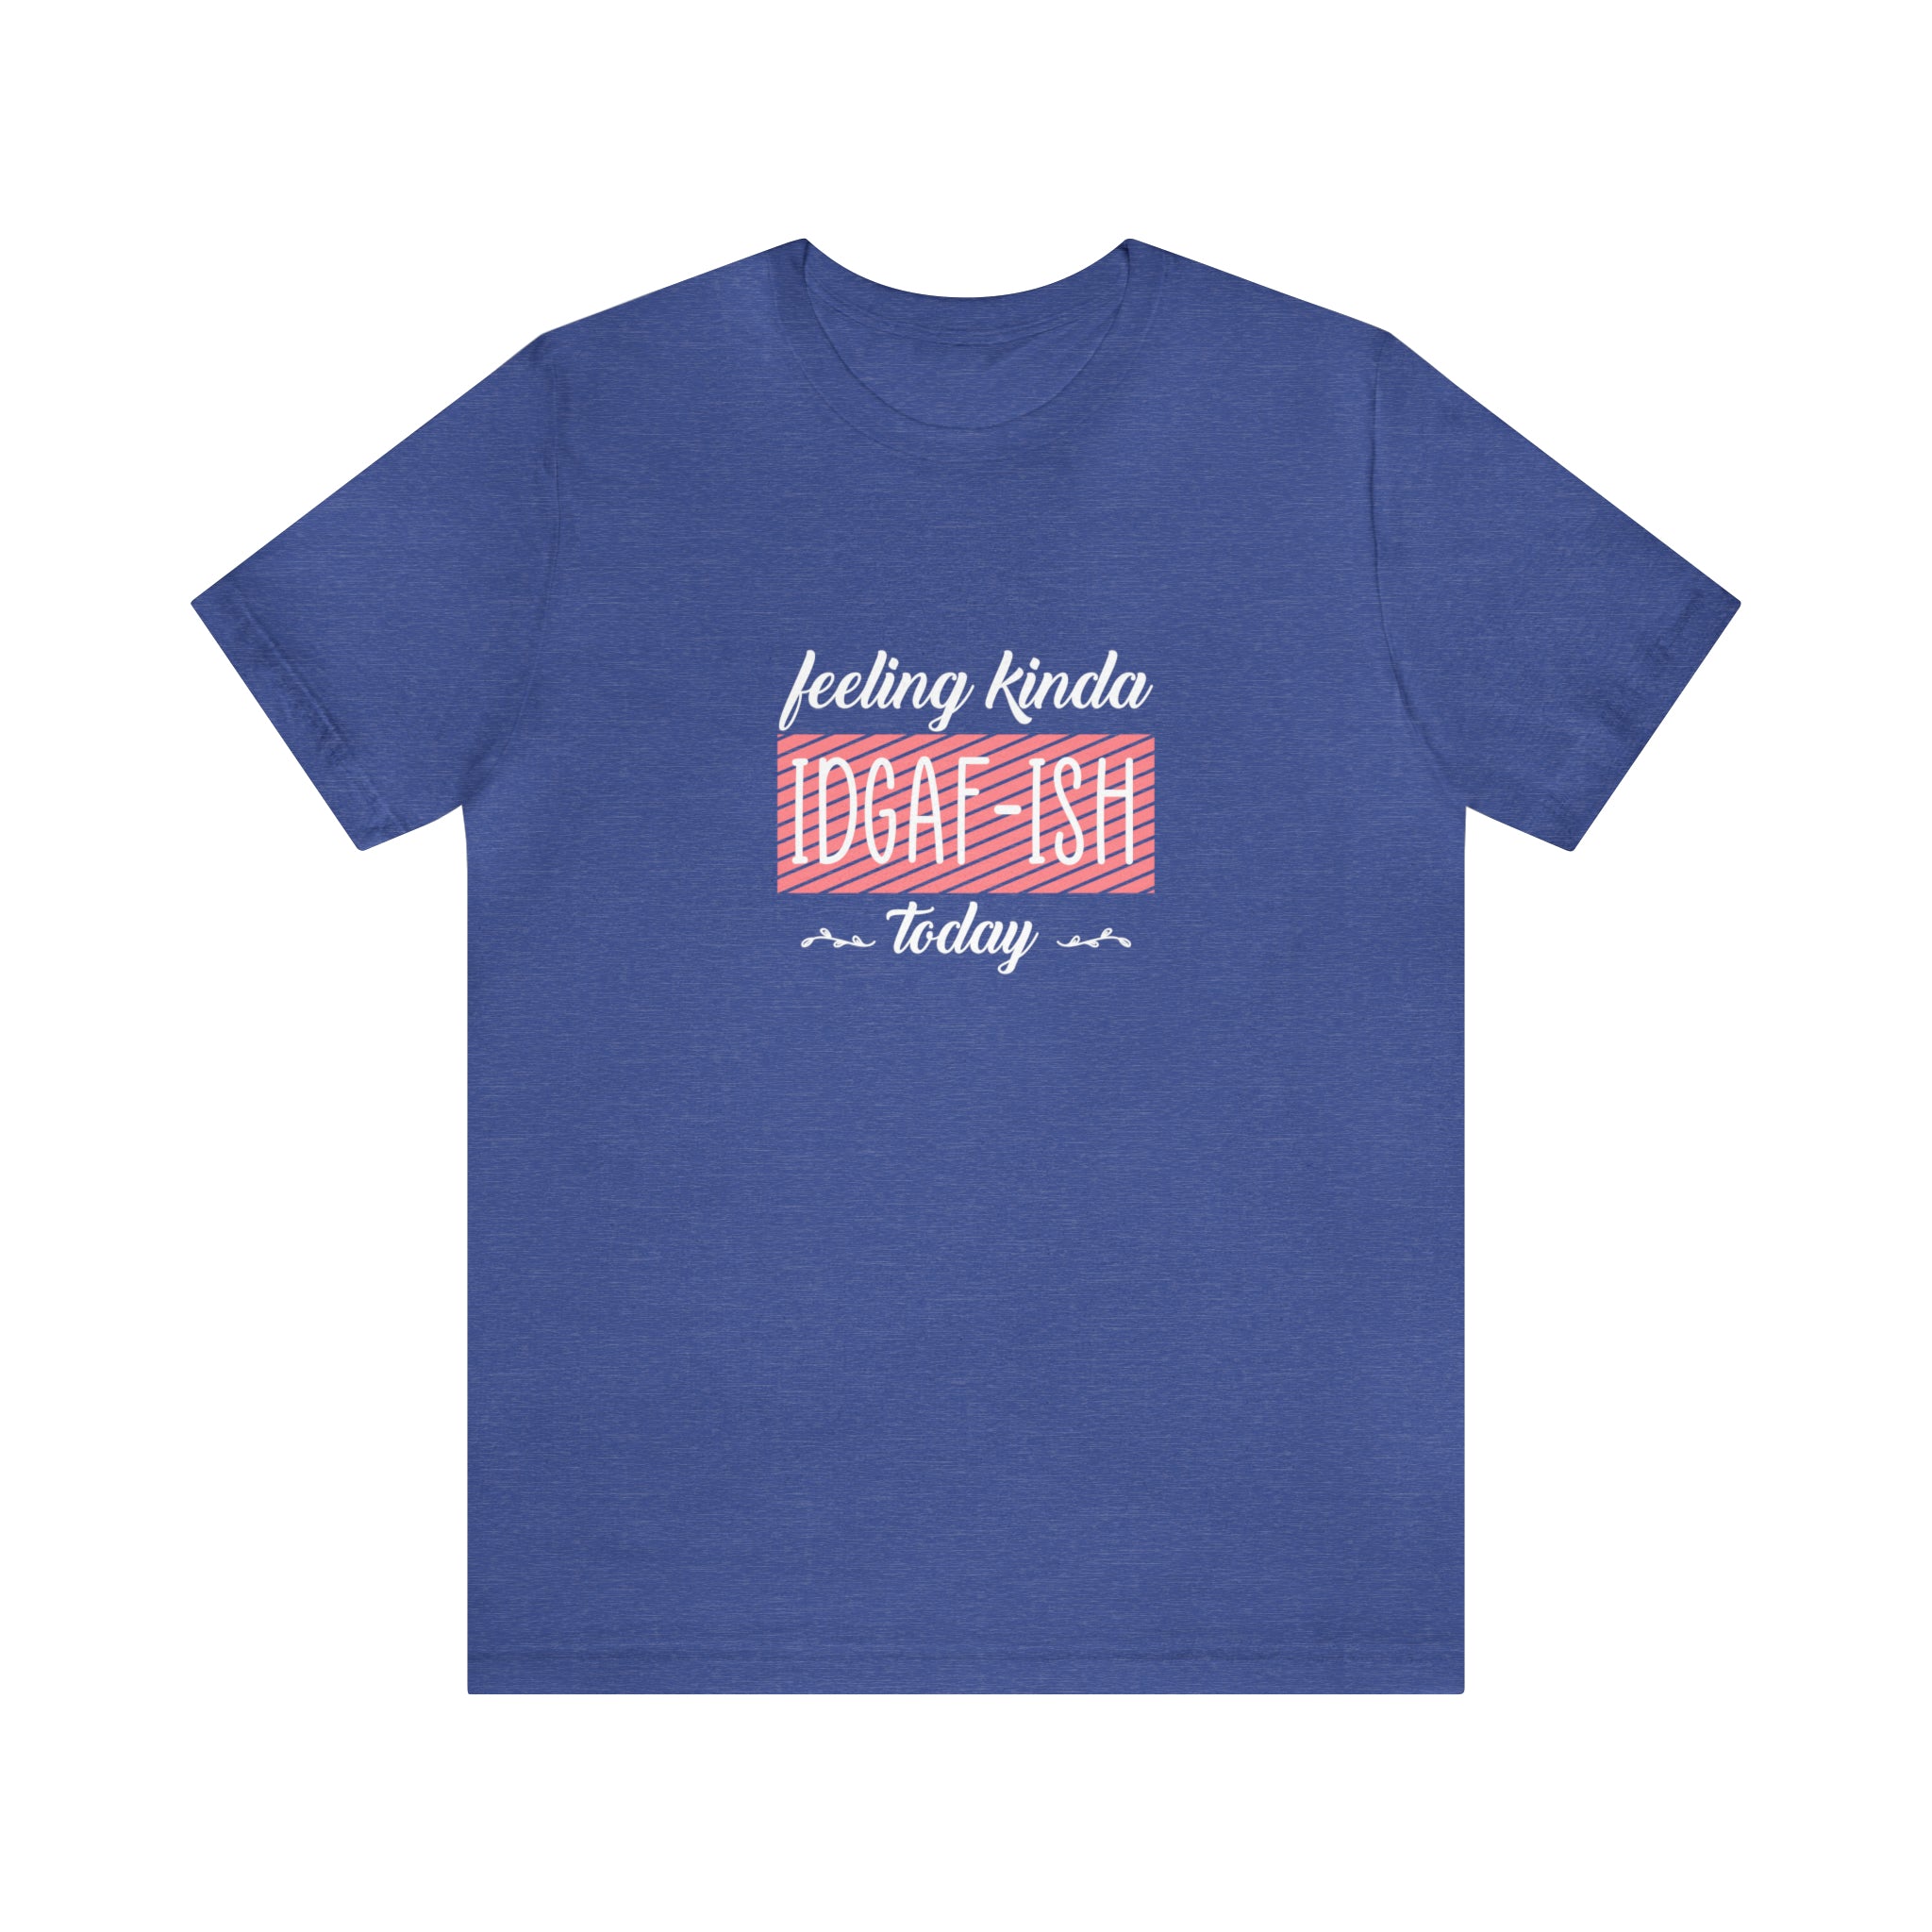 A Feeling kinda T-Shirt with the words 'flying kites today' on it, made by Printify.